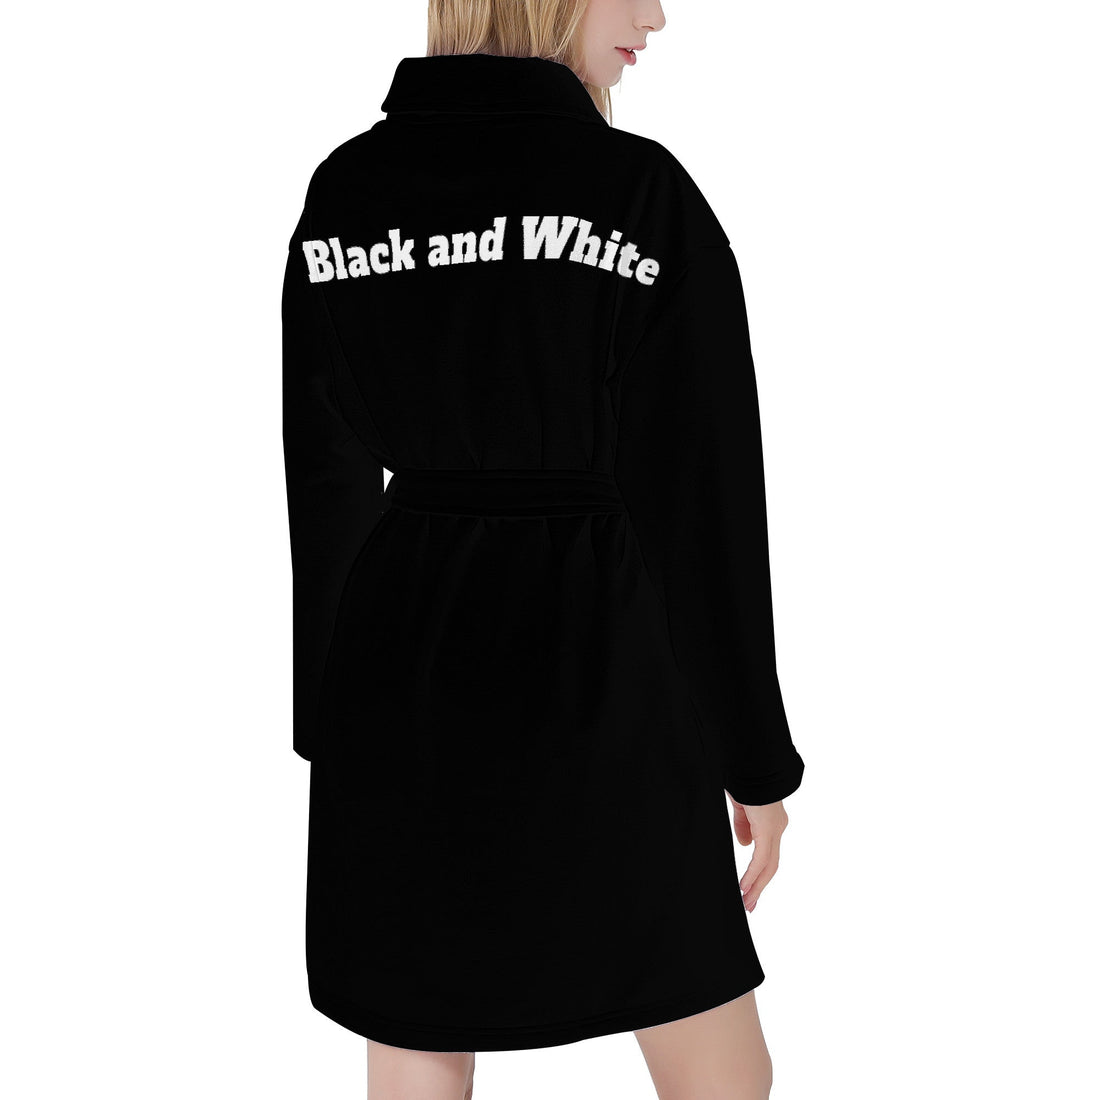 Cocoon in Style: The Black and White Charm of the Bath Robe Black Home-clothes-jewelry